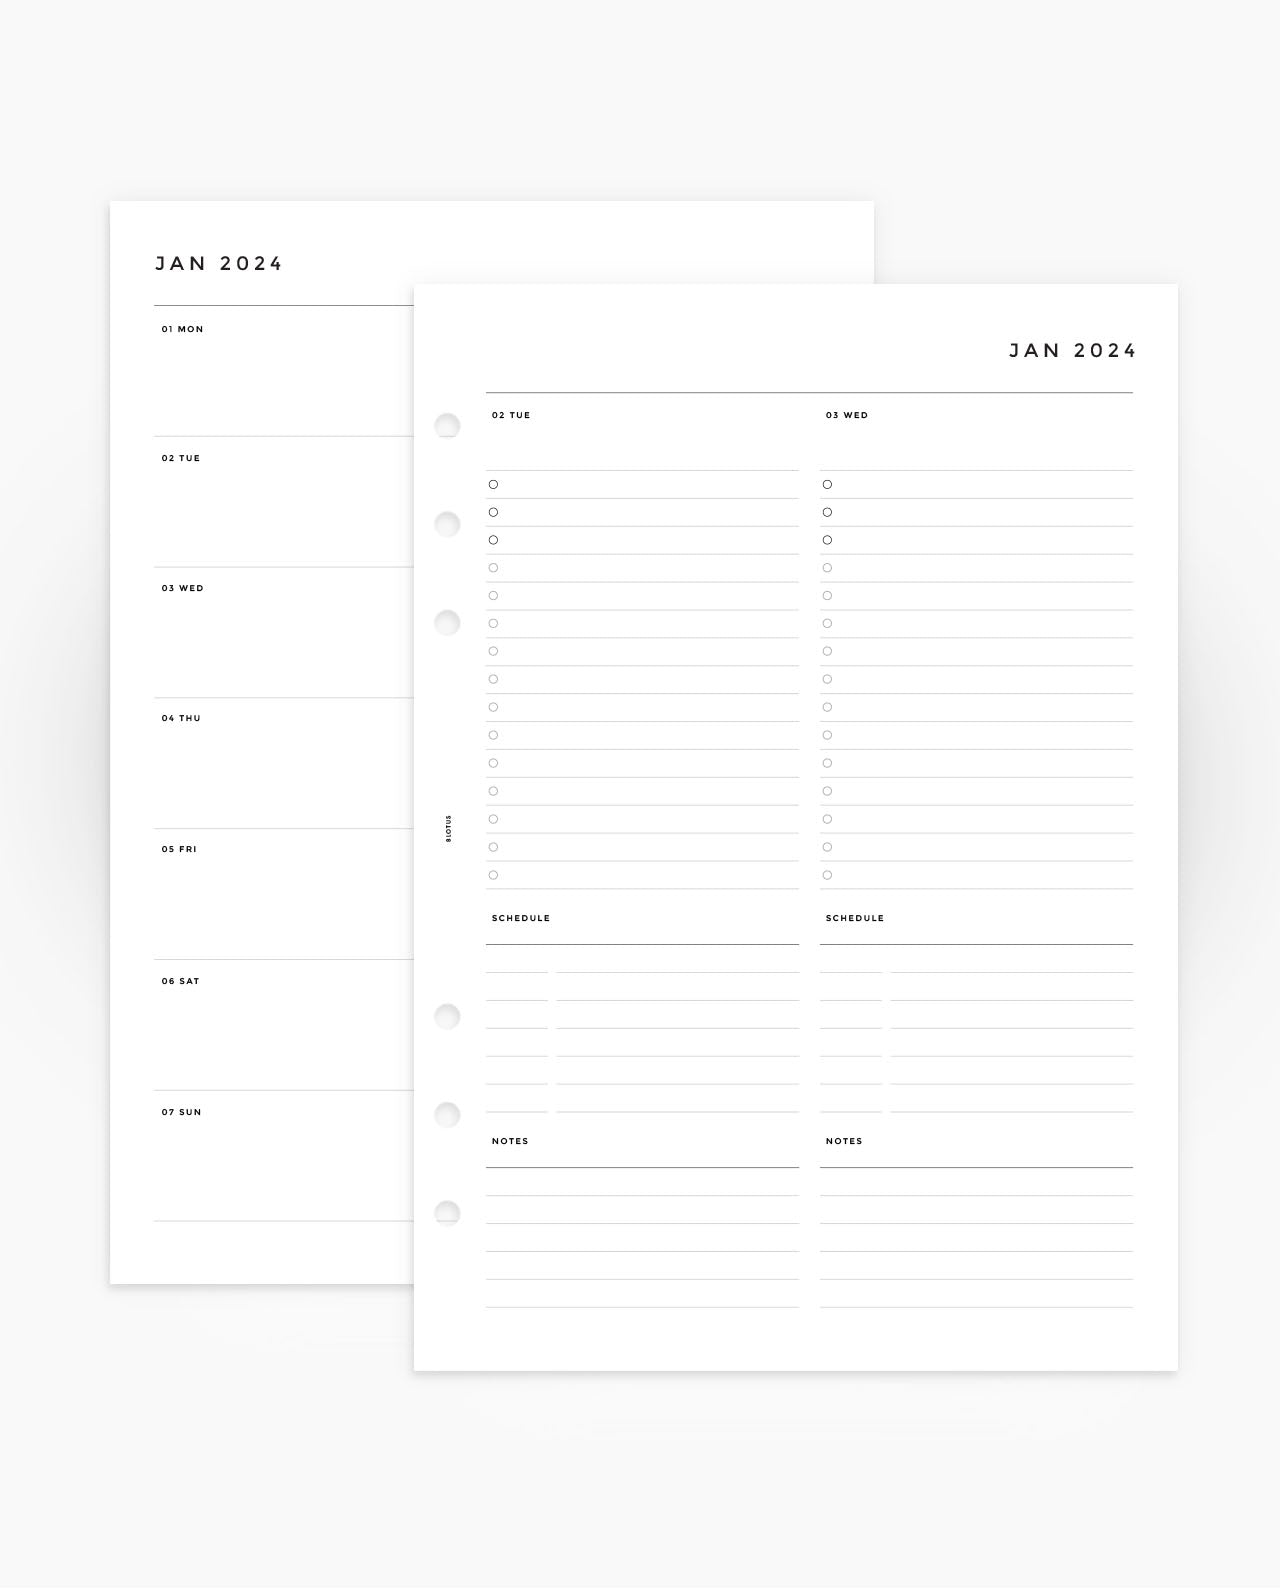 MN080 - 2024 Daily Planner Inserts - 2DO1P (PREORDER)